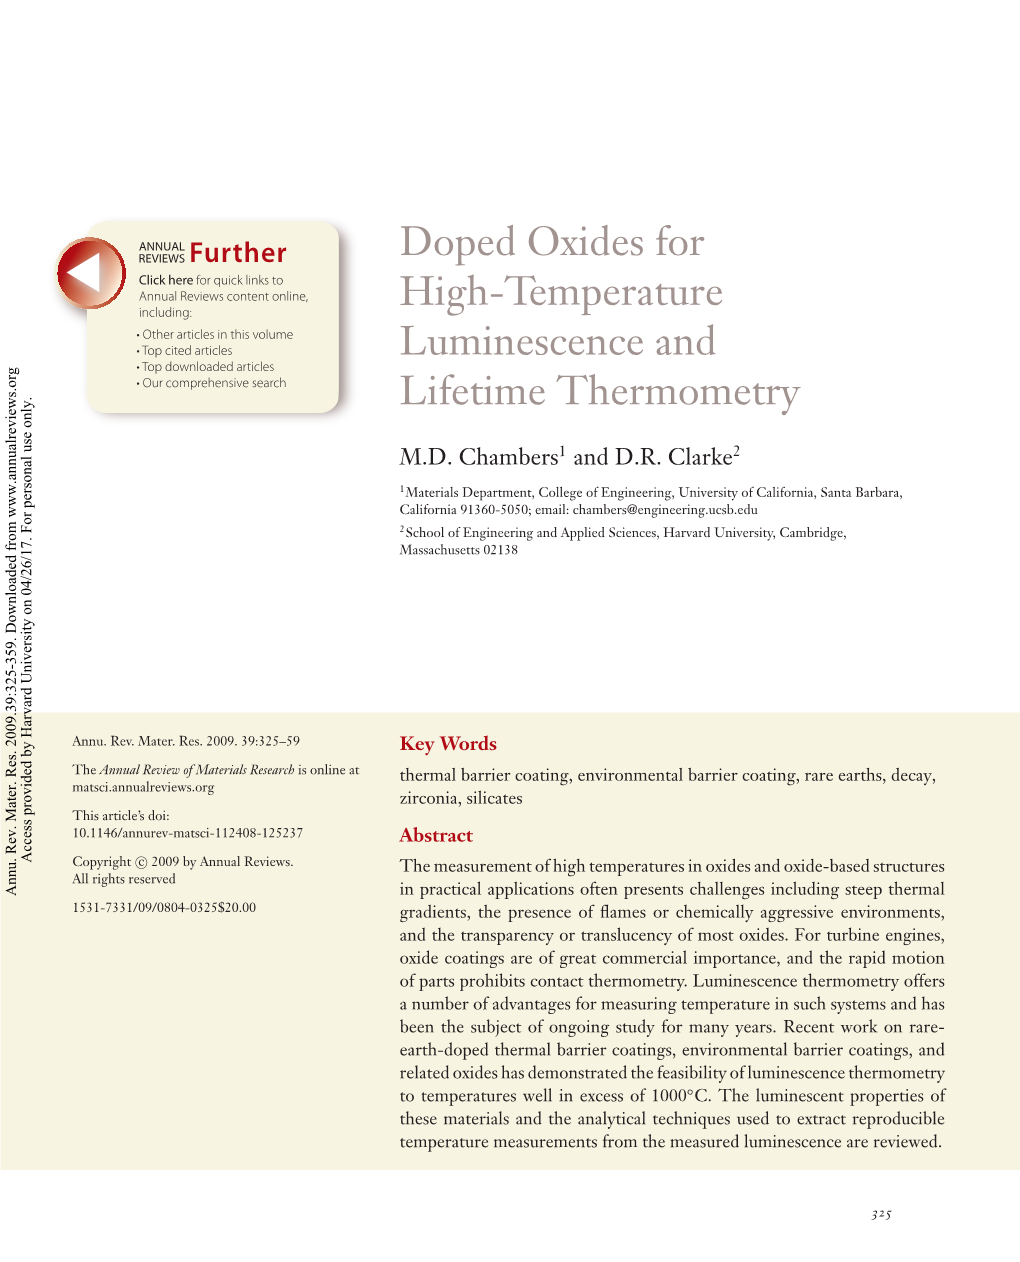 Doped Oxides for High-Temperature Luminescence and Lifetime Thermometry